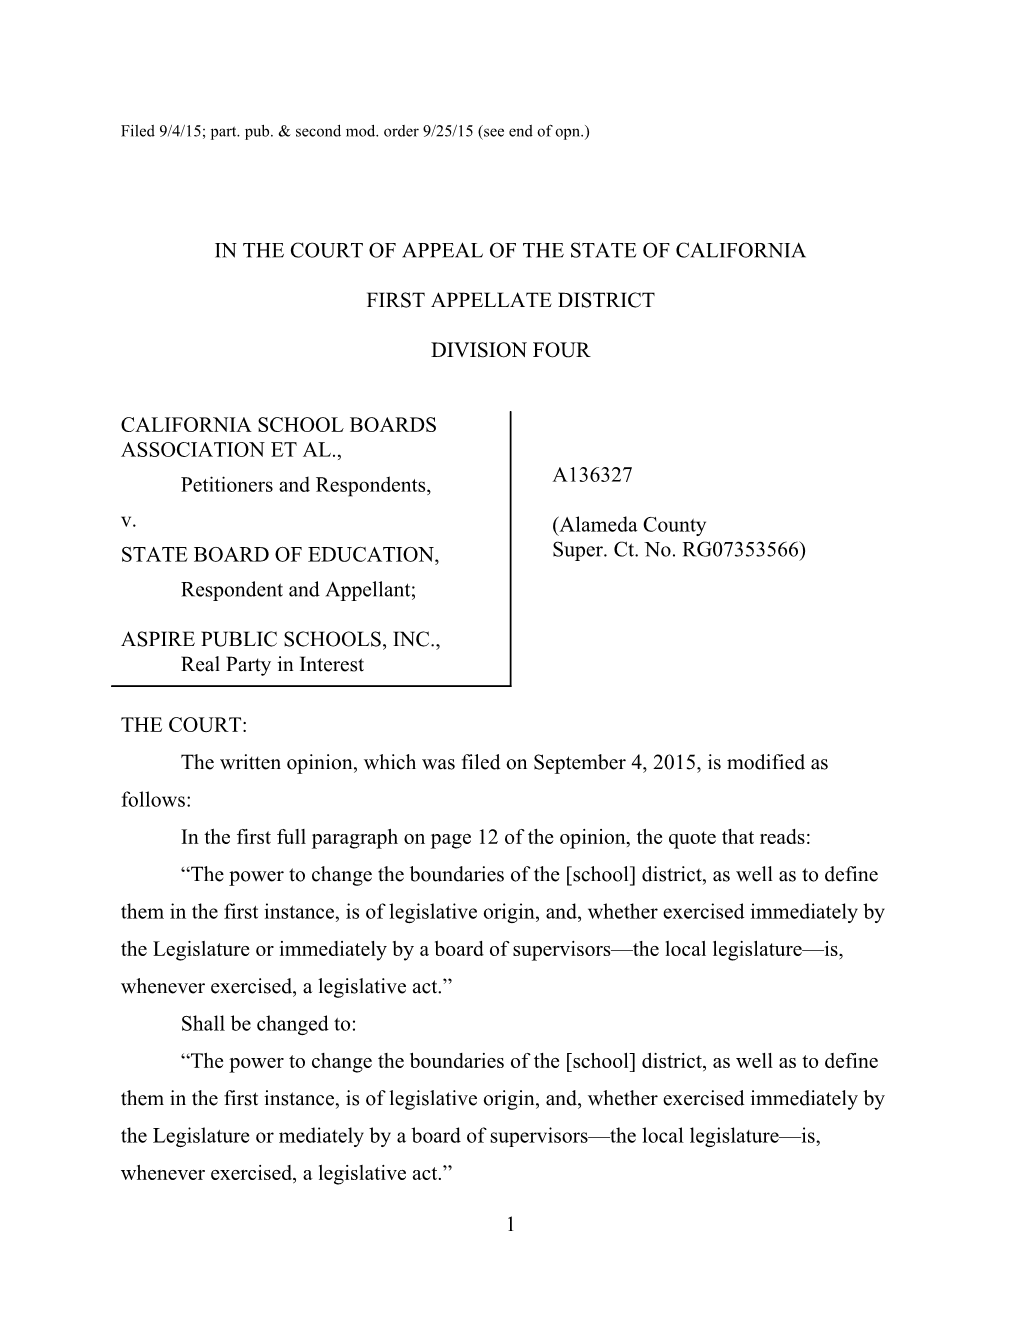 Filed 9/4/15; Part. Pub. & Second Mod. Order 9/25/15 (See End of Opn.)